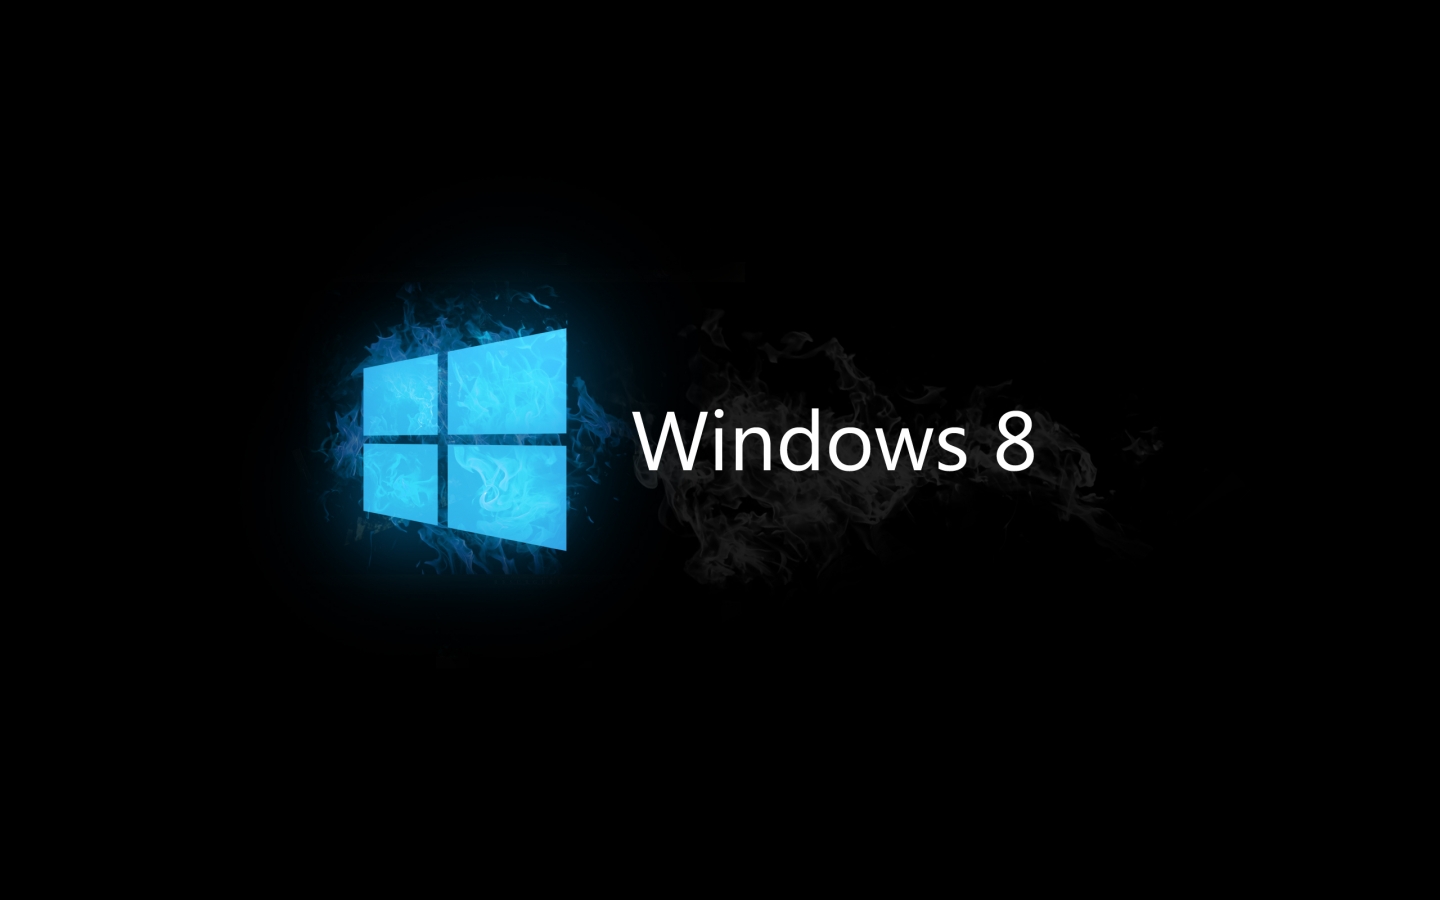 Windows 8 Blue and Black for 1440 x 900 widescreen resolution